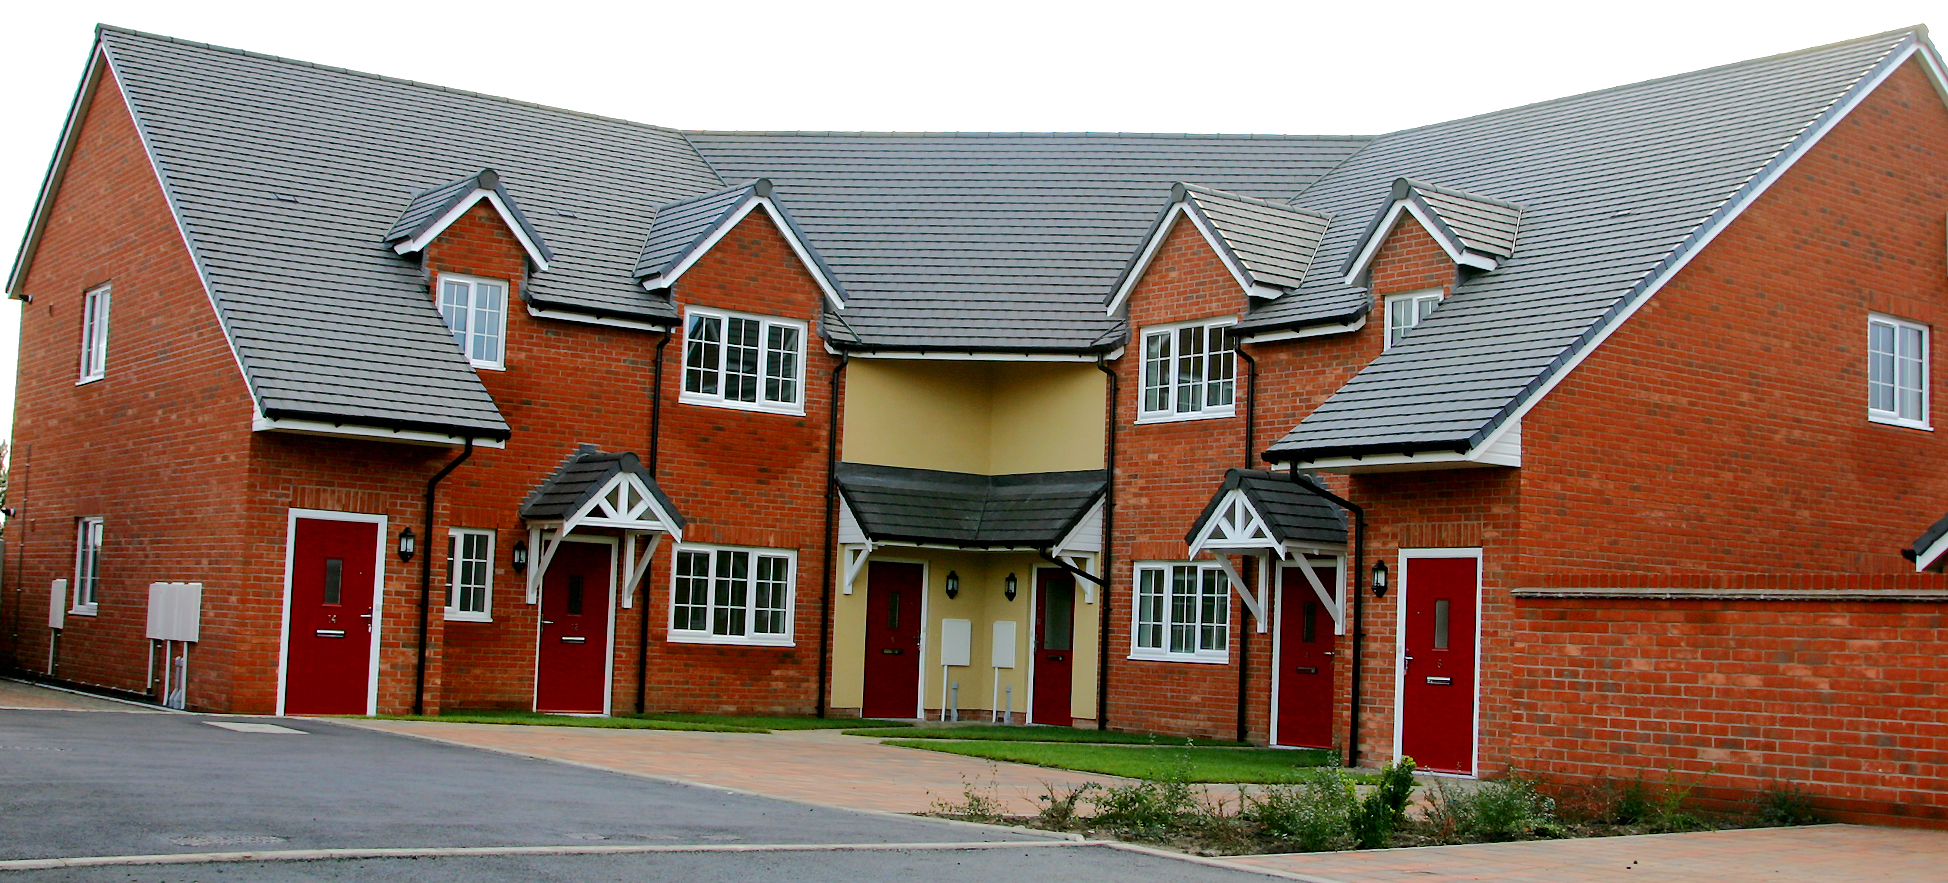 New build affordable housing by MELT Property at Baschurch, Shropshire